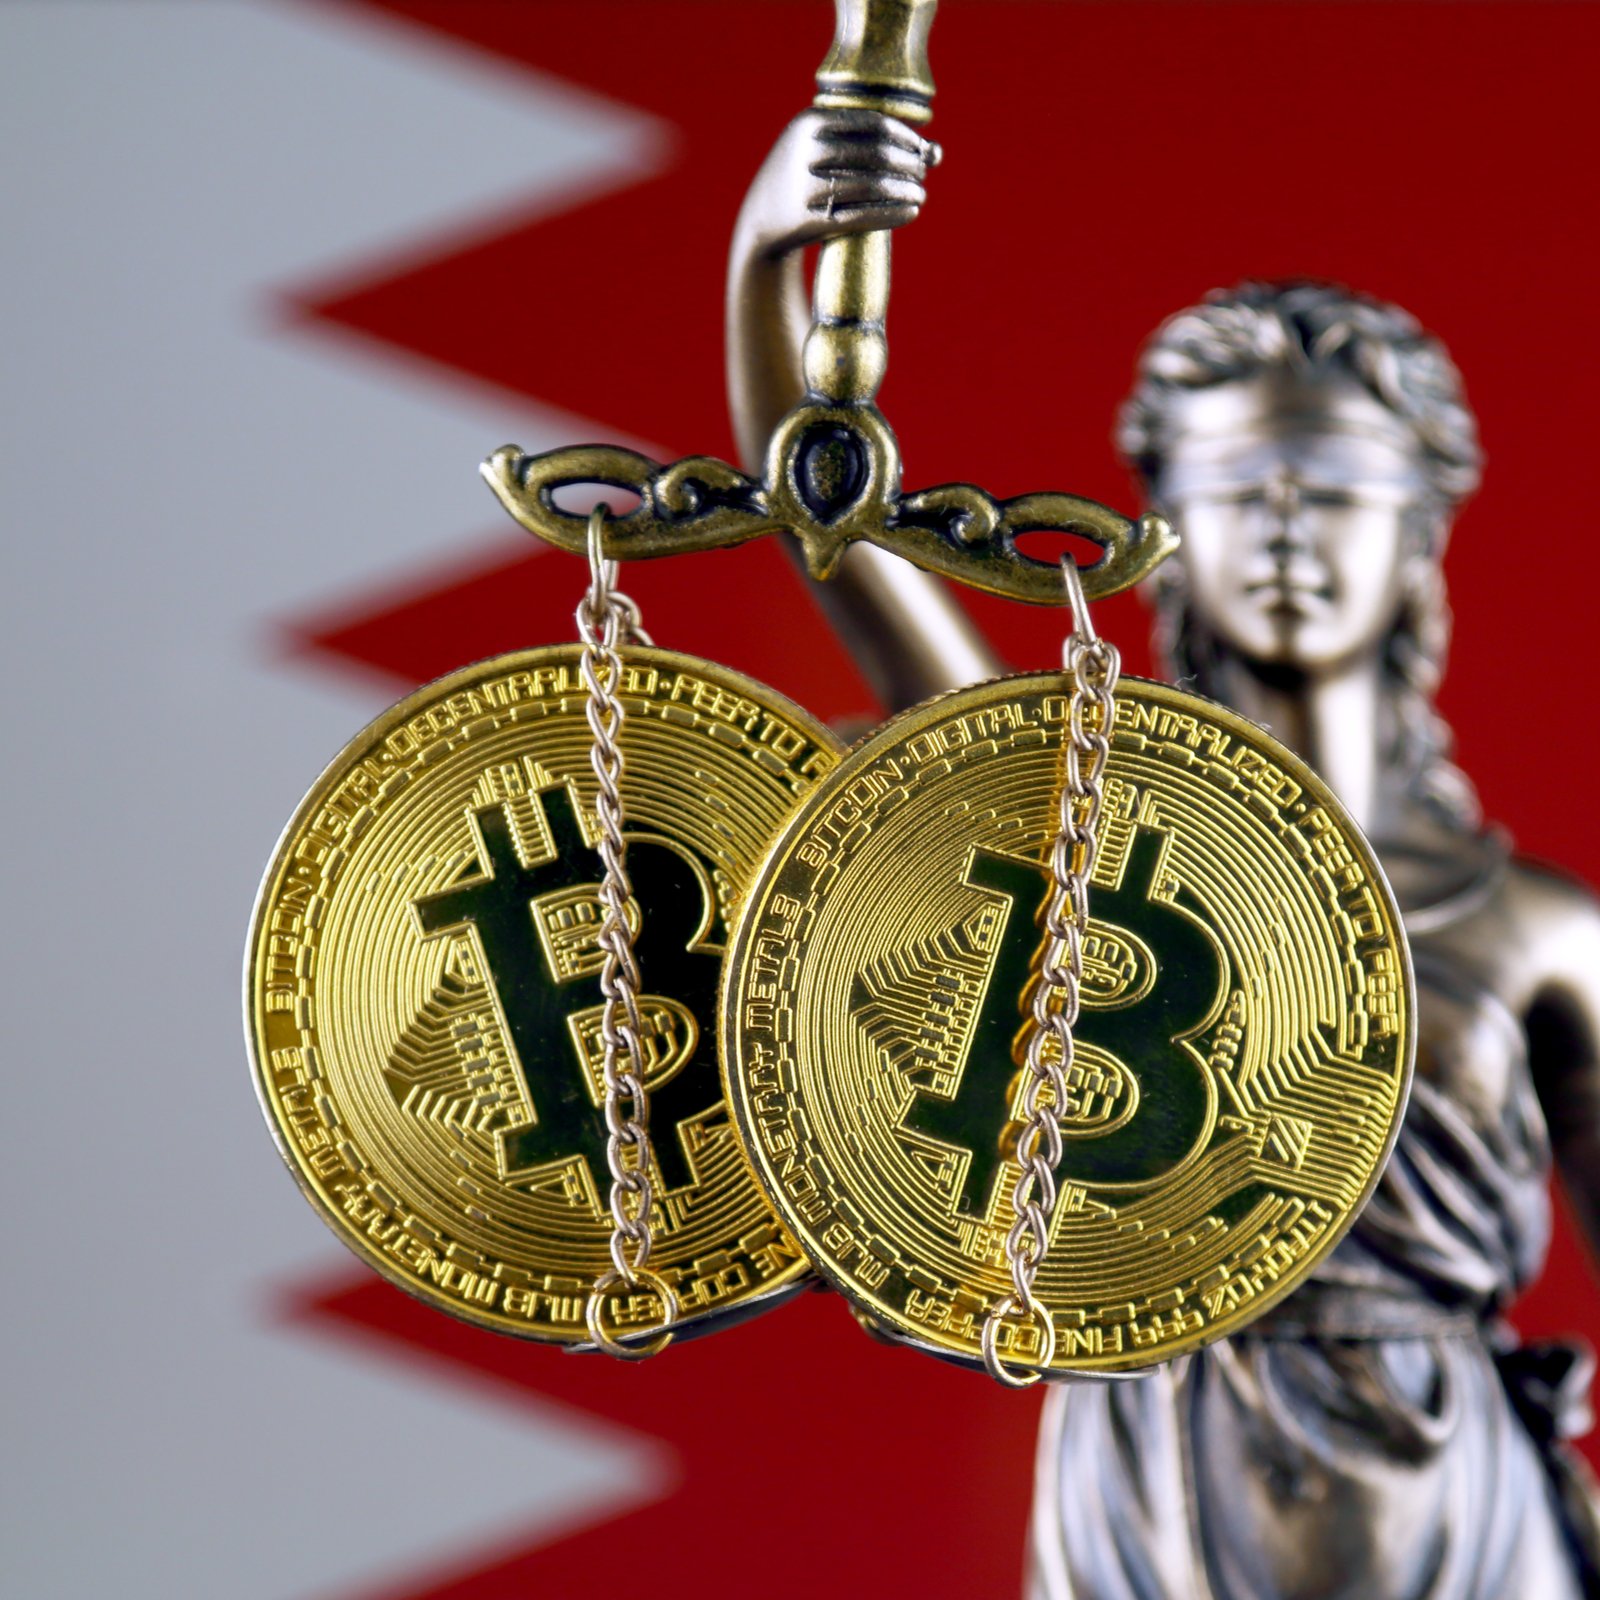 Belfrics Granted 'Sandbox License' to Open Cryptocurrency Exchange in Bahrain